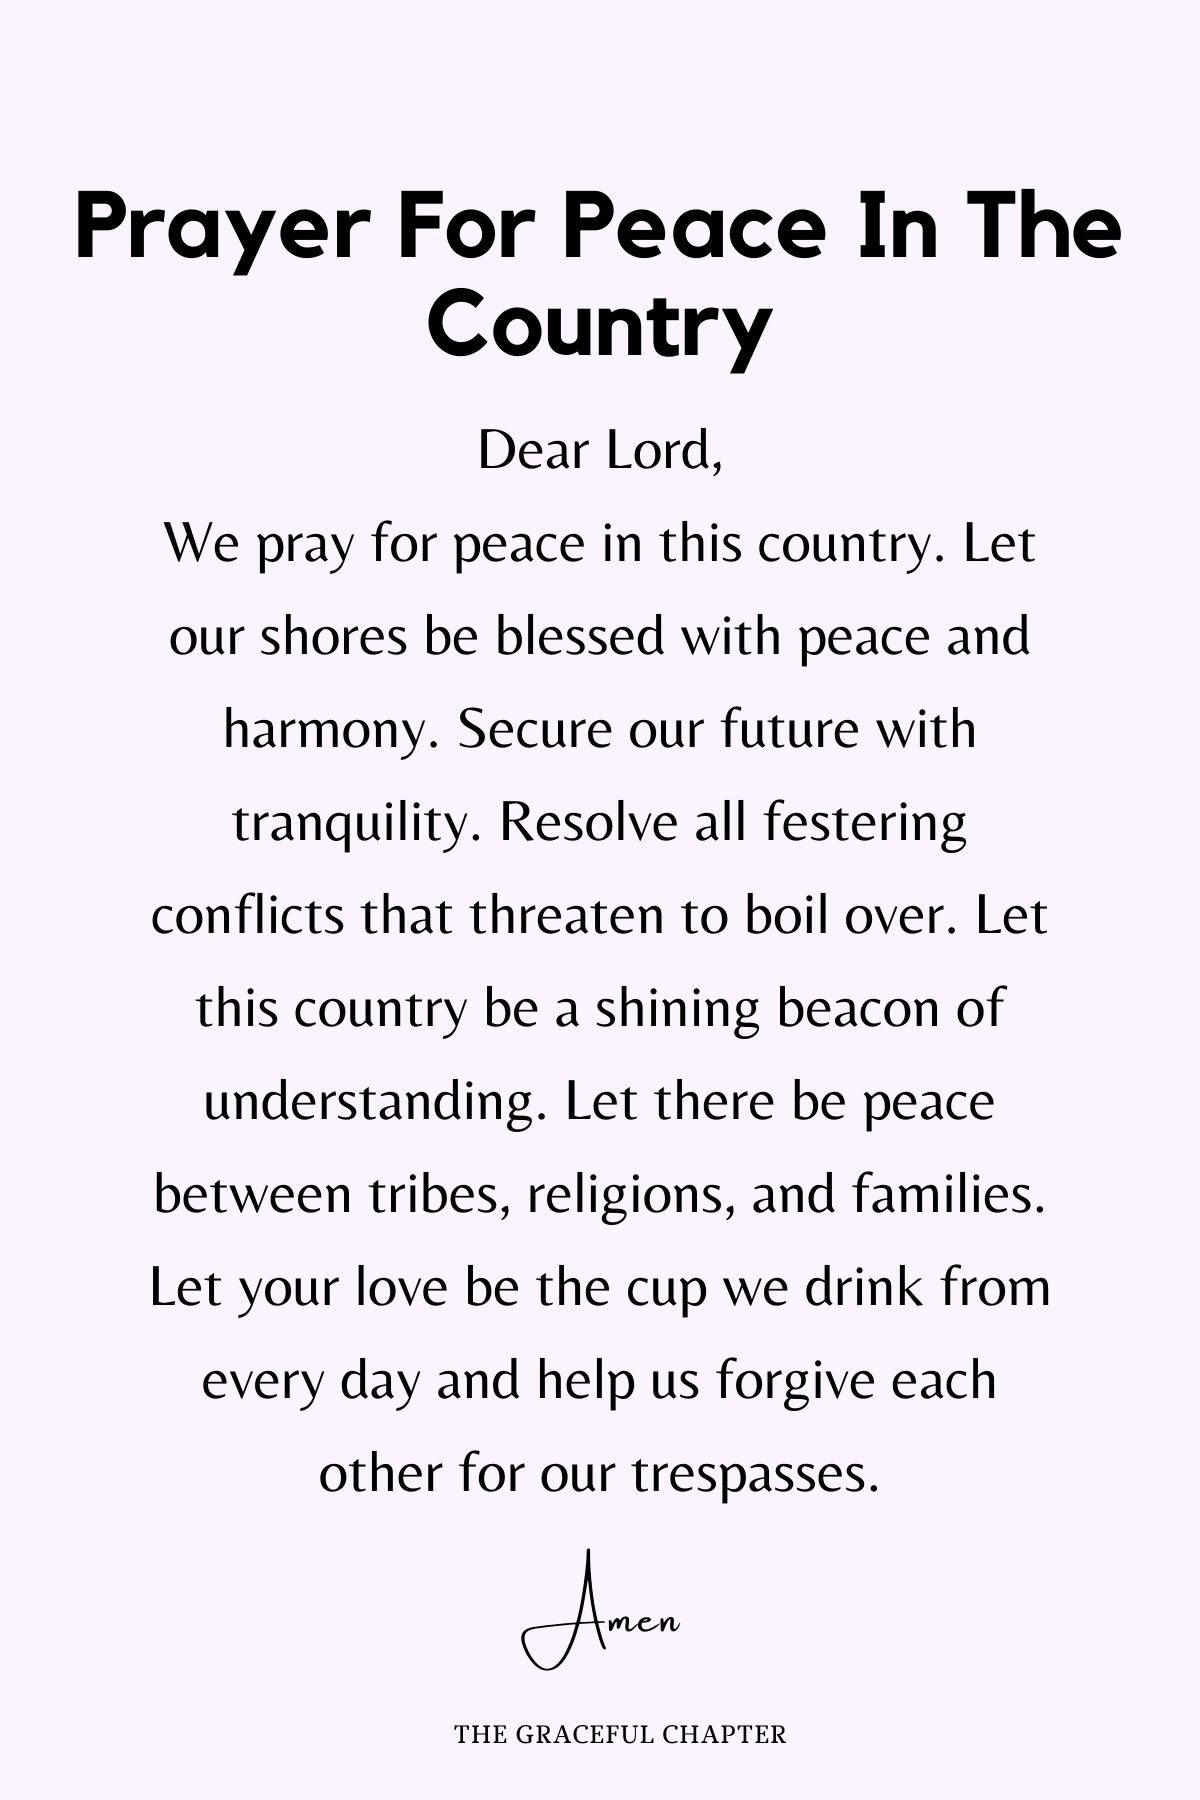 Prayer for peace in the country